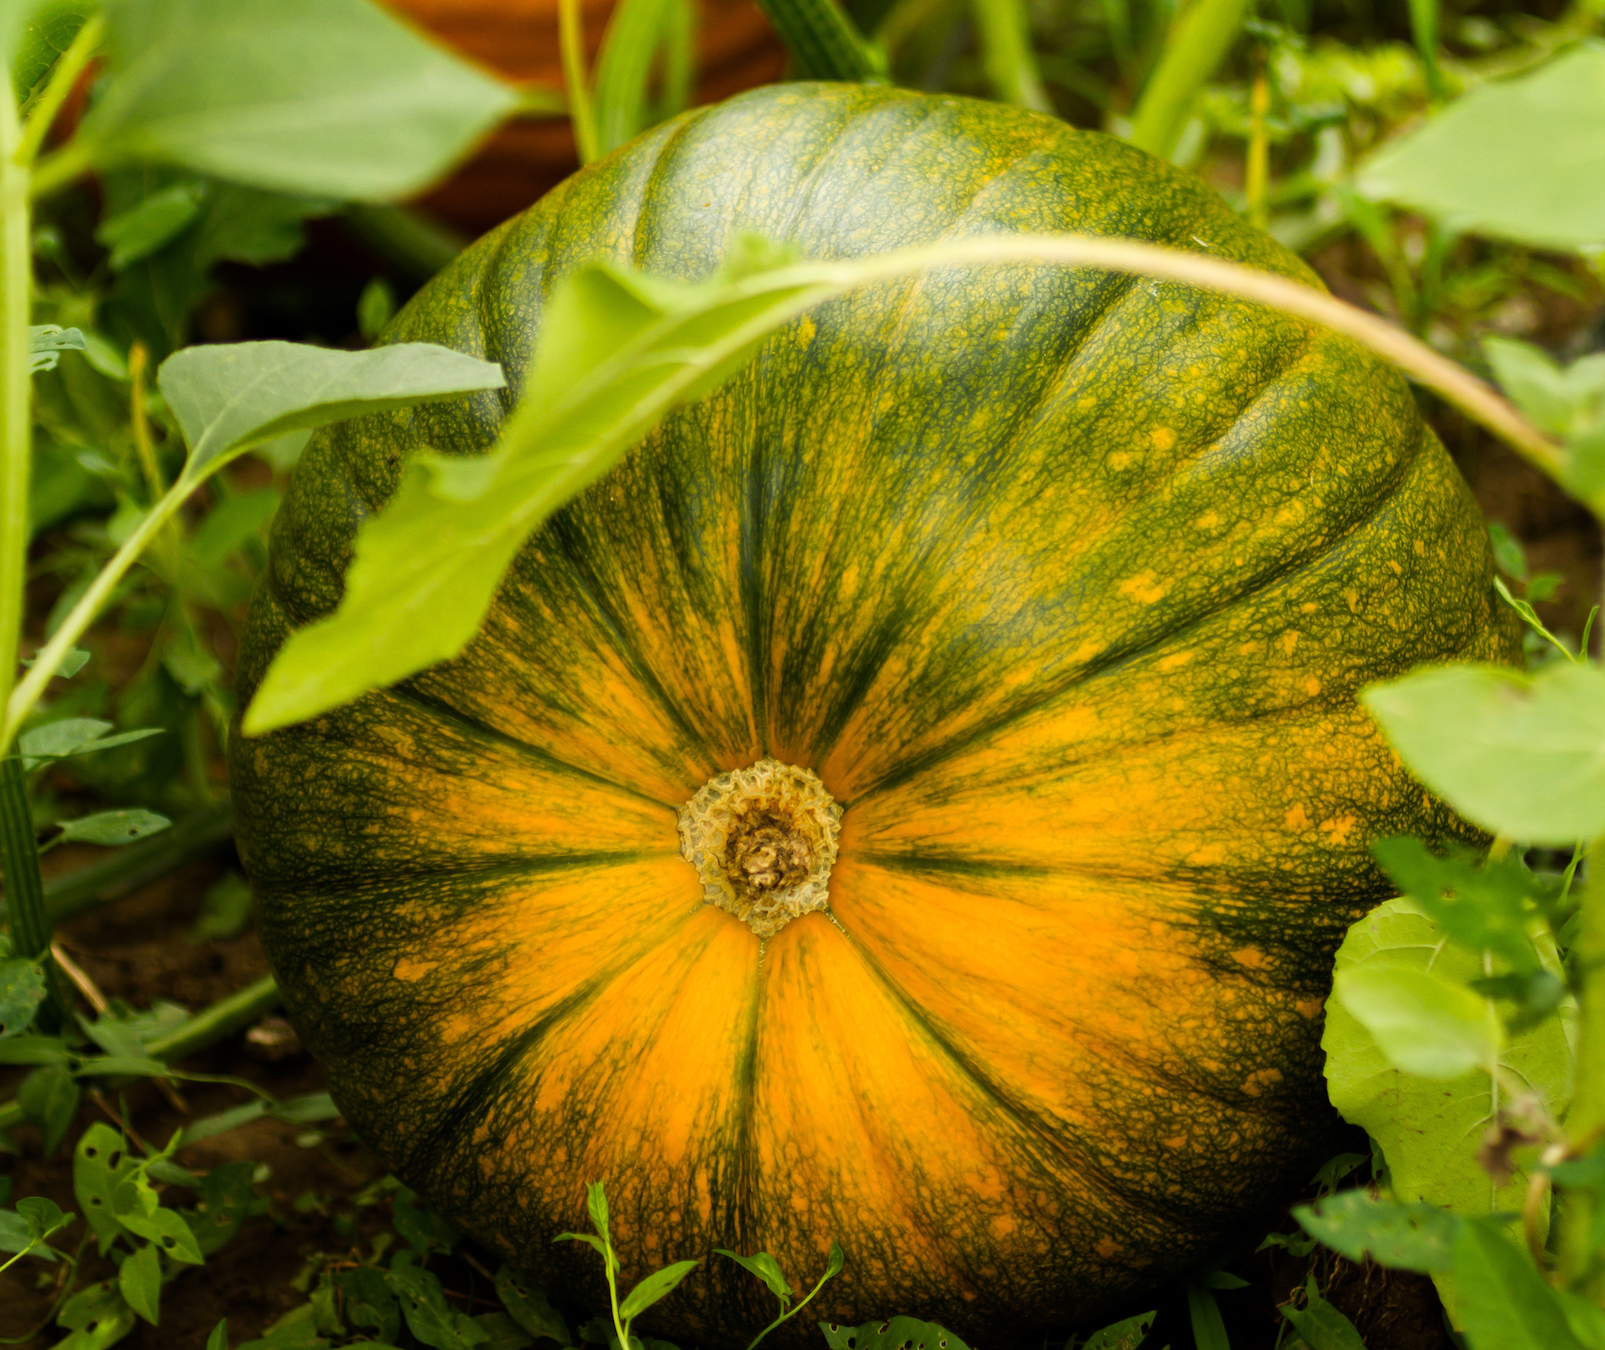 growing pumpkins: how to plant, grow, and harvest pumpkins | the